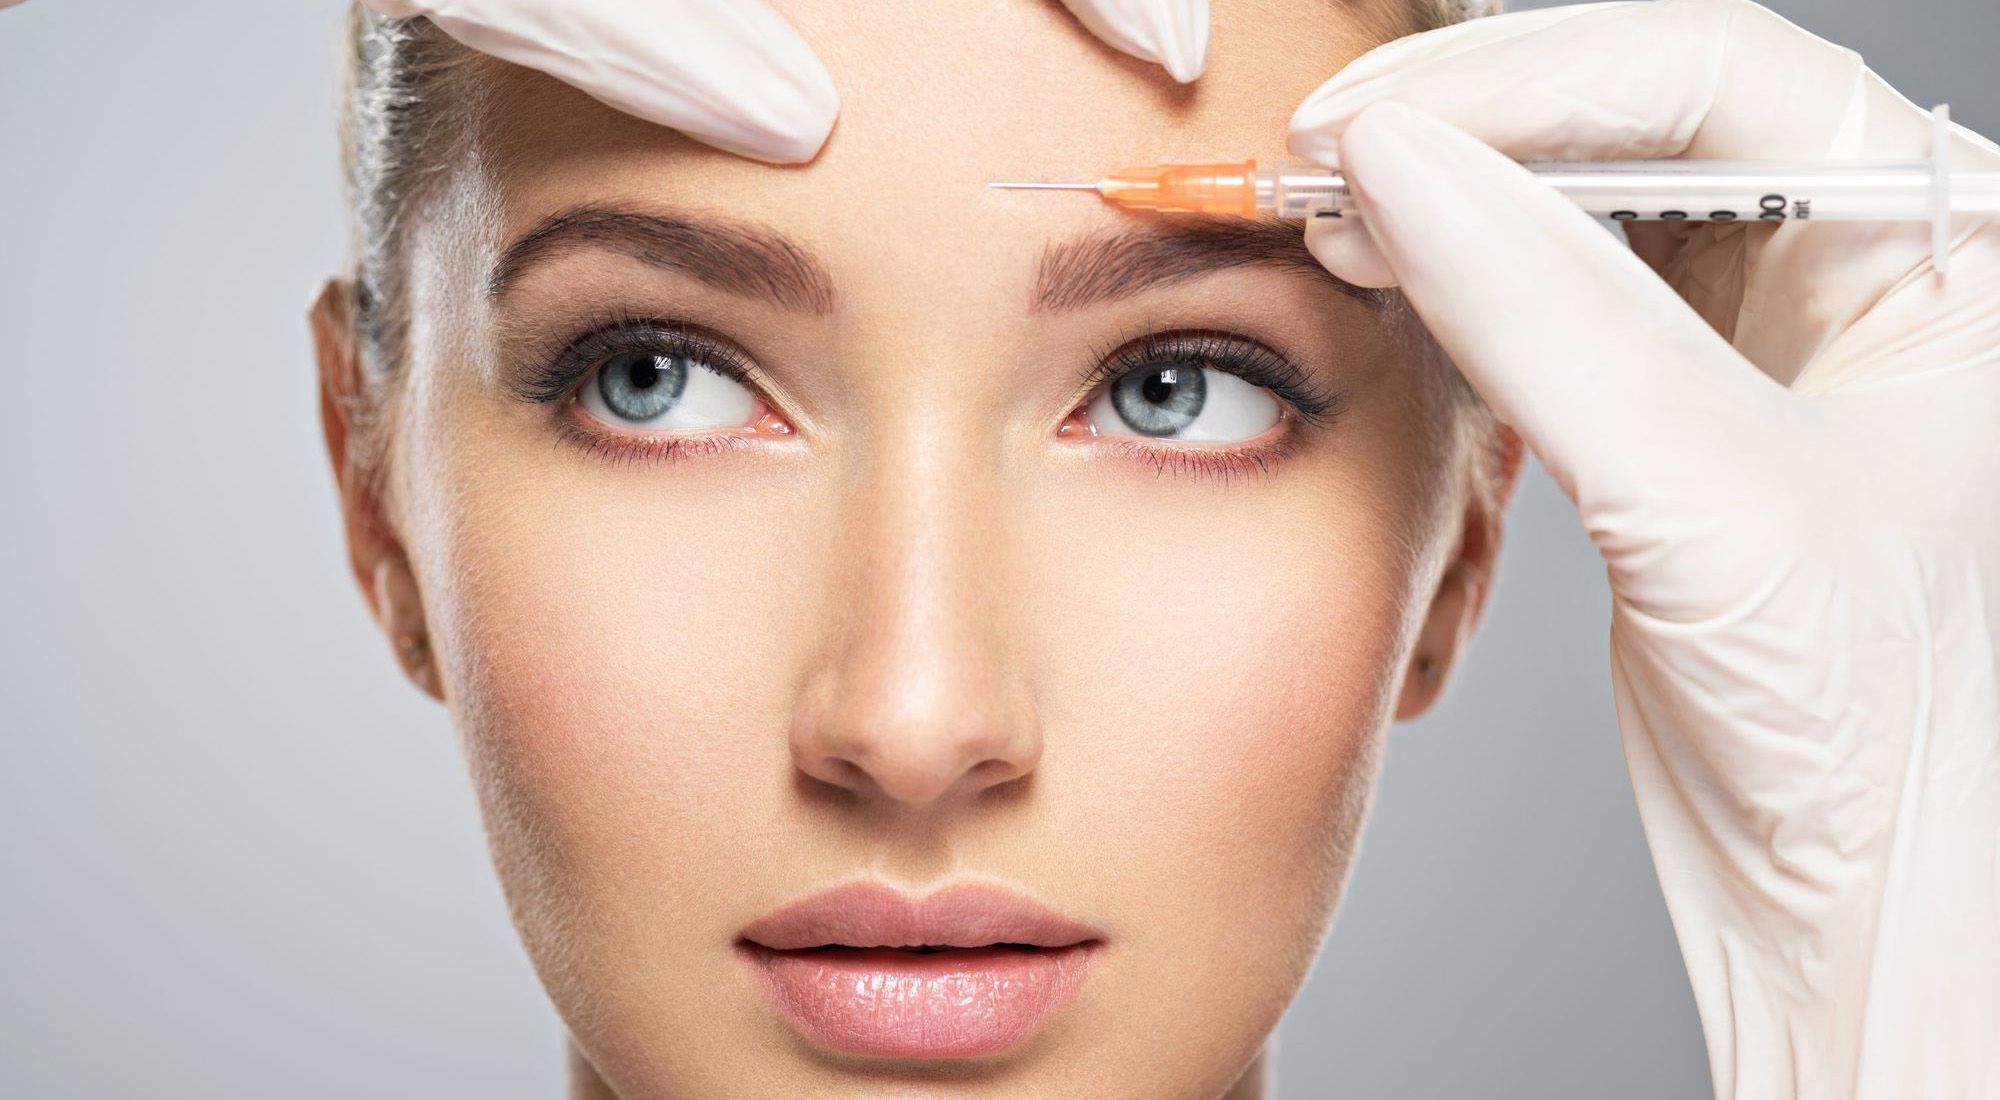 Experts Explain the Long-Term Effects of Botox